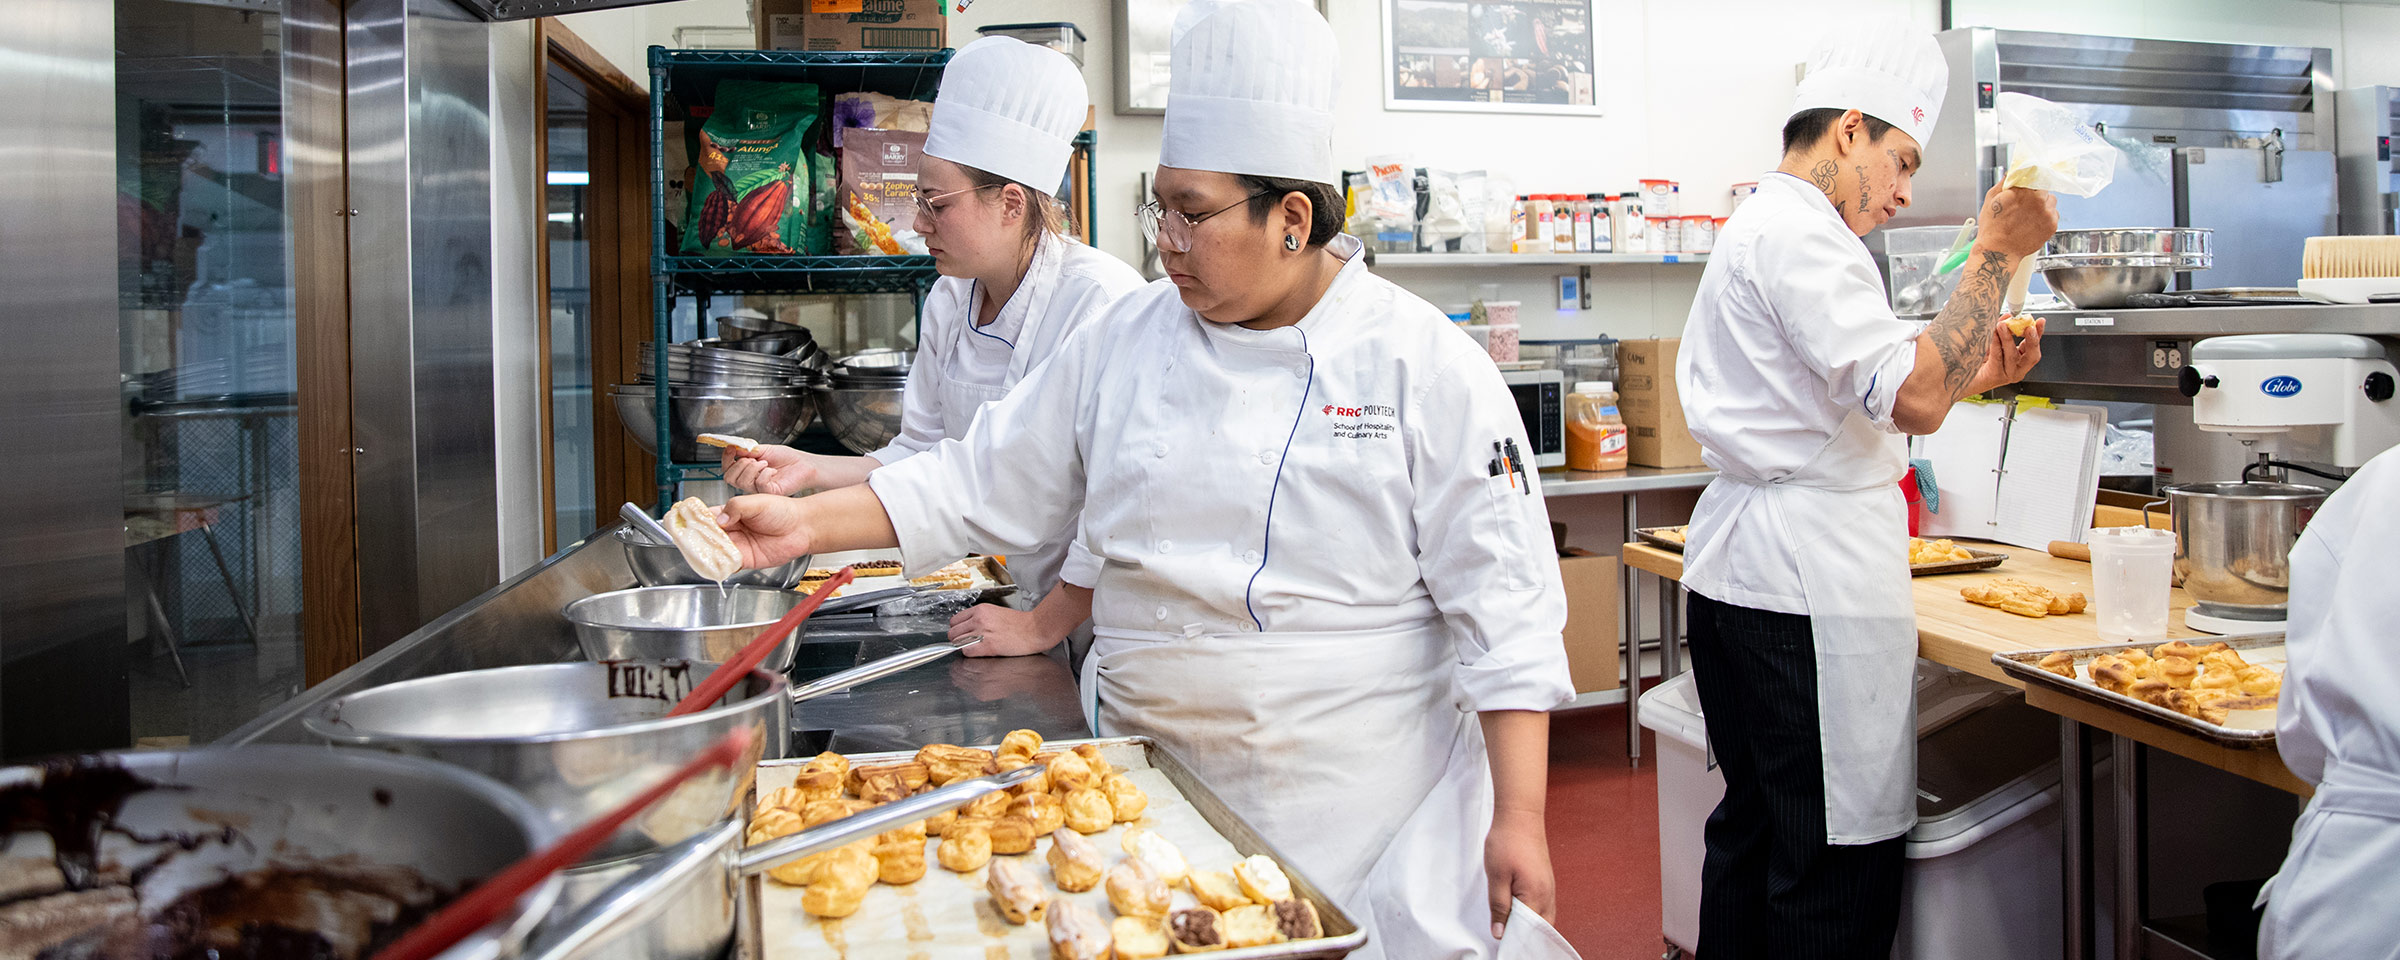 Culinary students cooking in a commercial kitchen